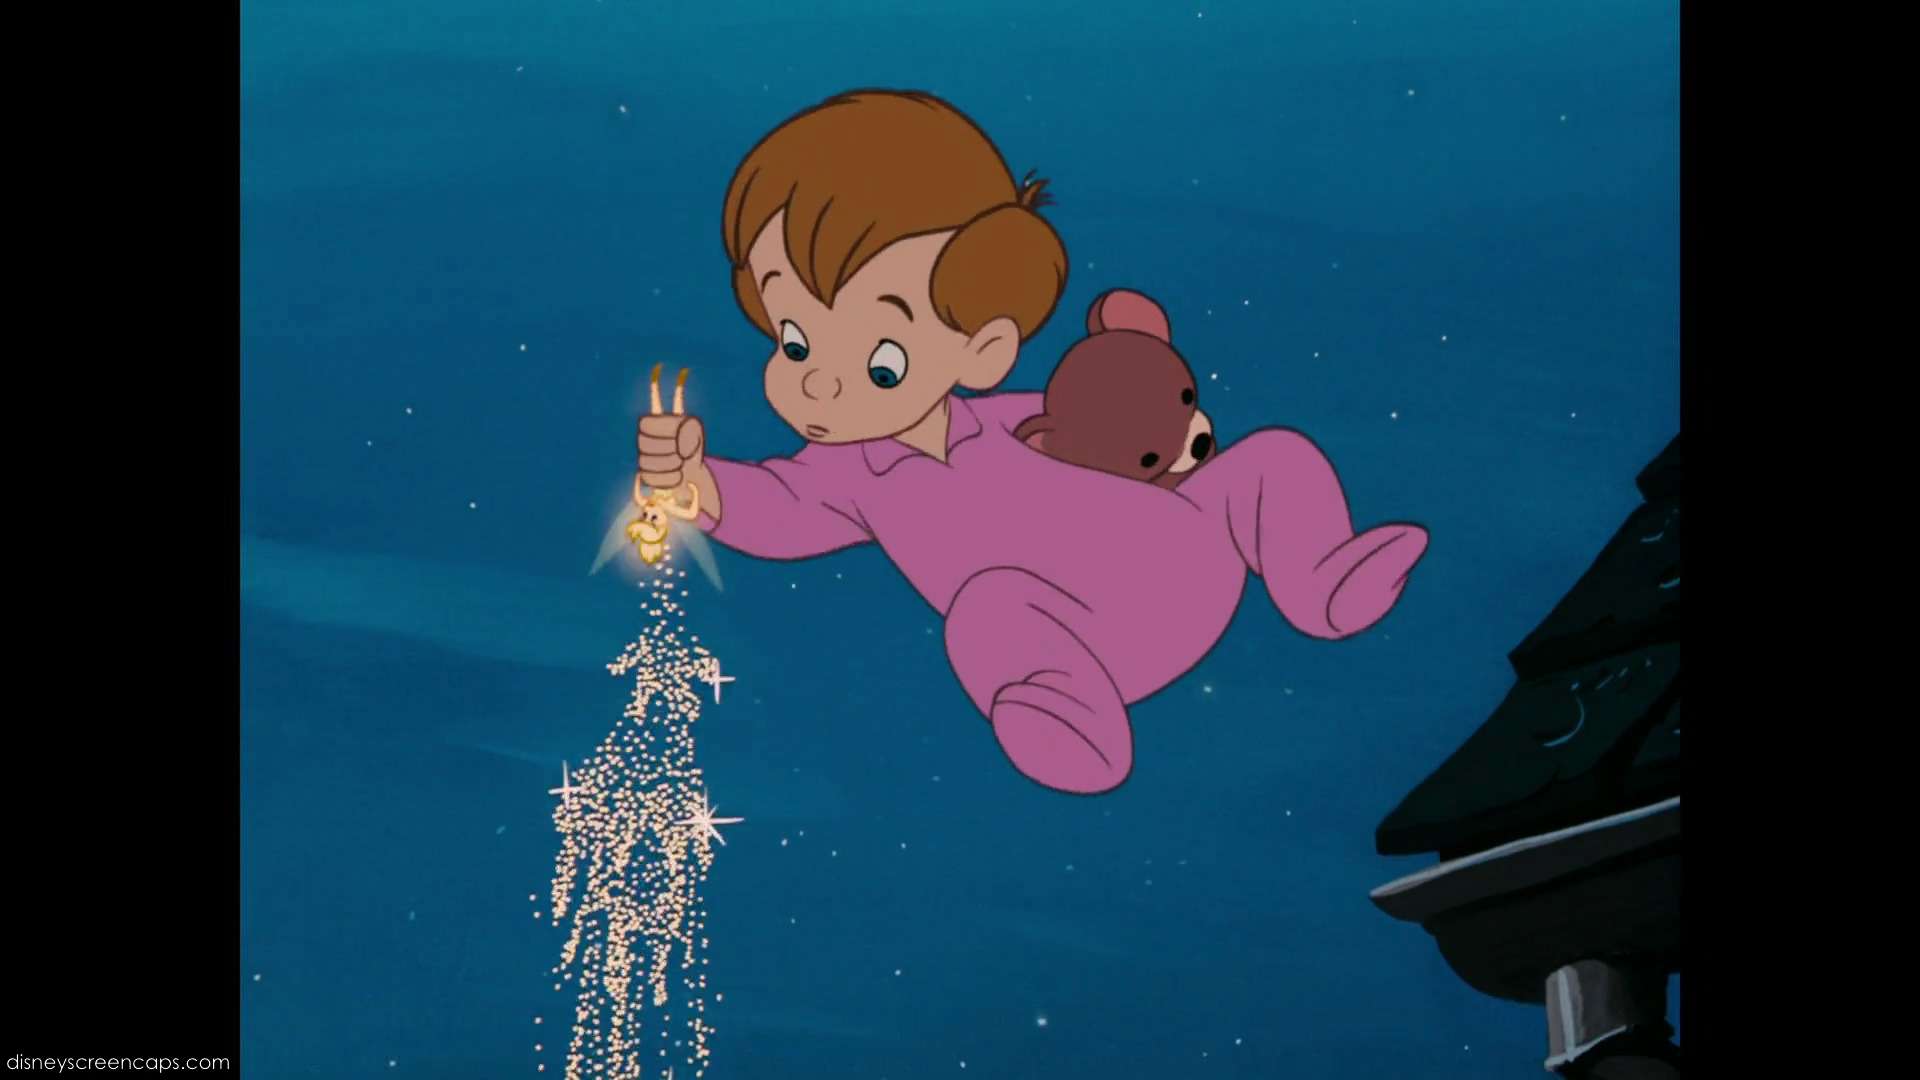 Which Disney Peter Pan Character Are You?